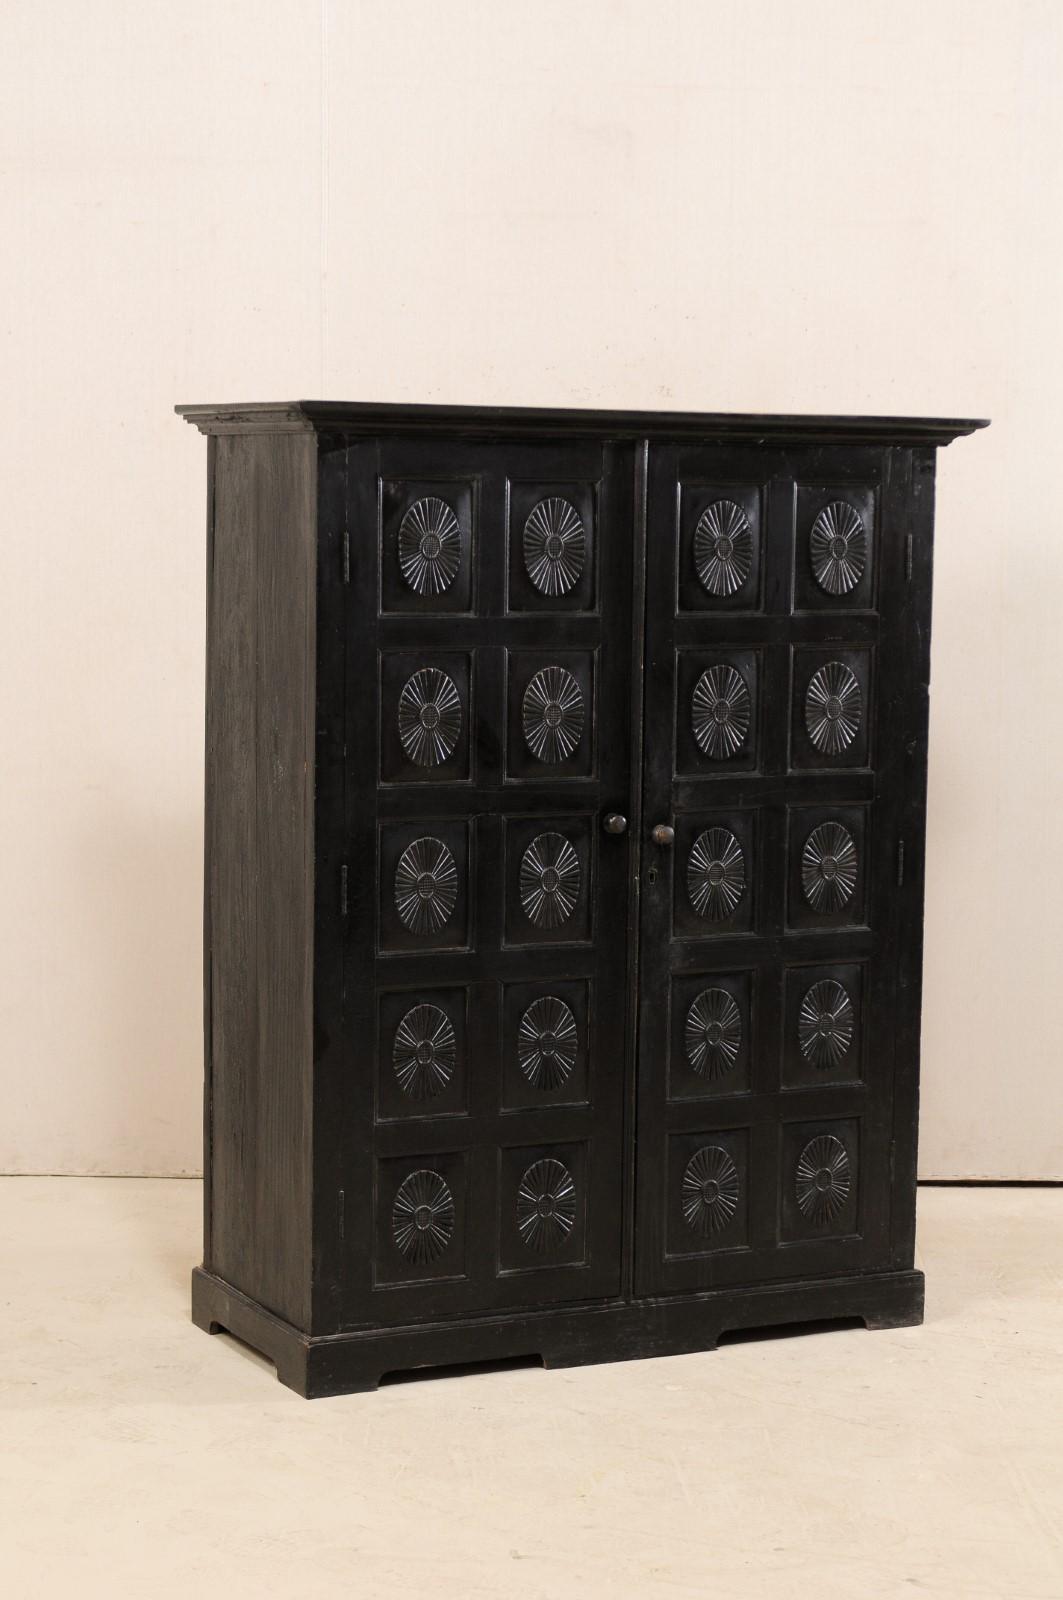 A British Colonial ebonized wood cabinet from the early to mid-20th century. This British Colonial cabinet from India, standing approximately 5.25 feet in height, features two doors, adorn in raised panels with oval/floral centers, and a nicely